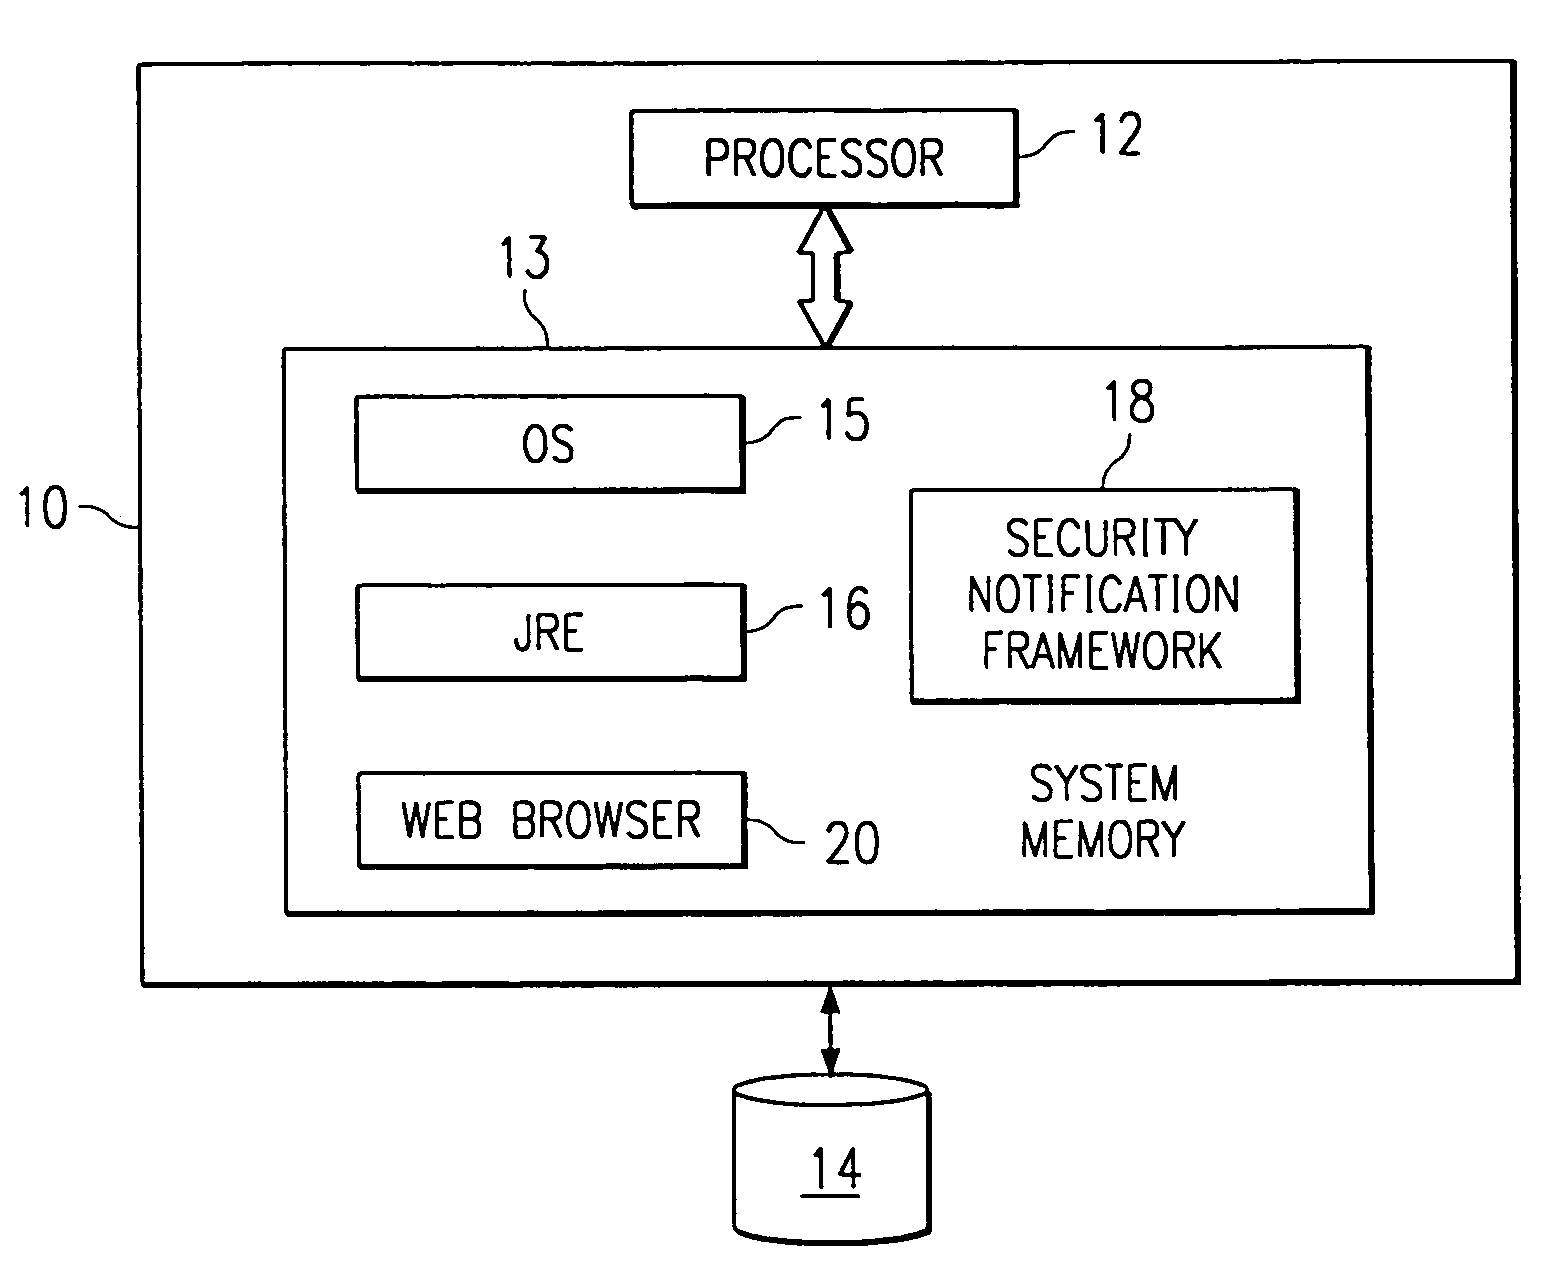 Notification of modifications to a trusted computing base